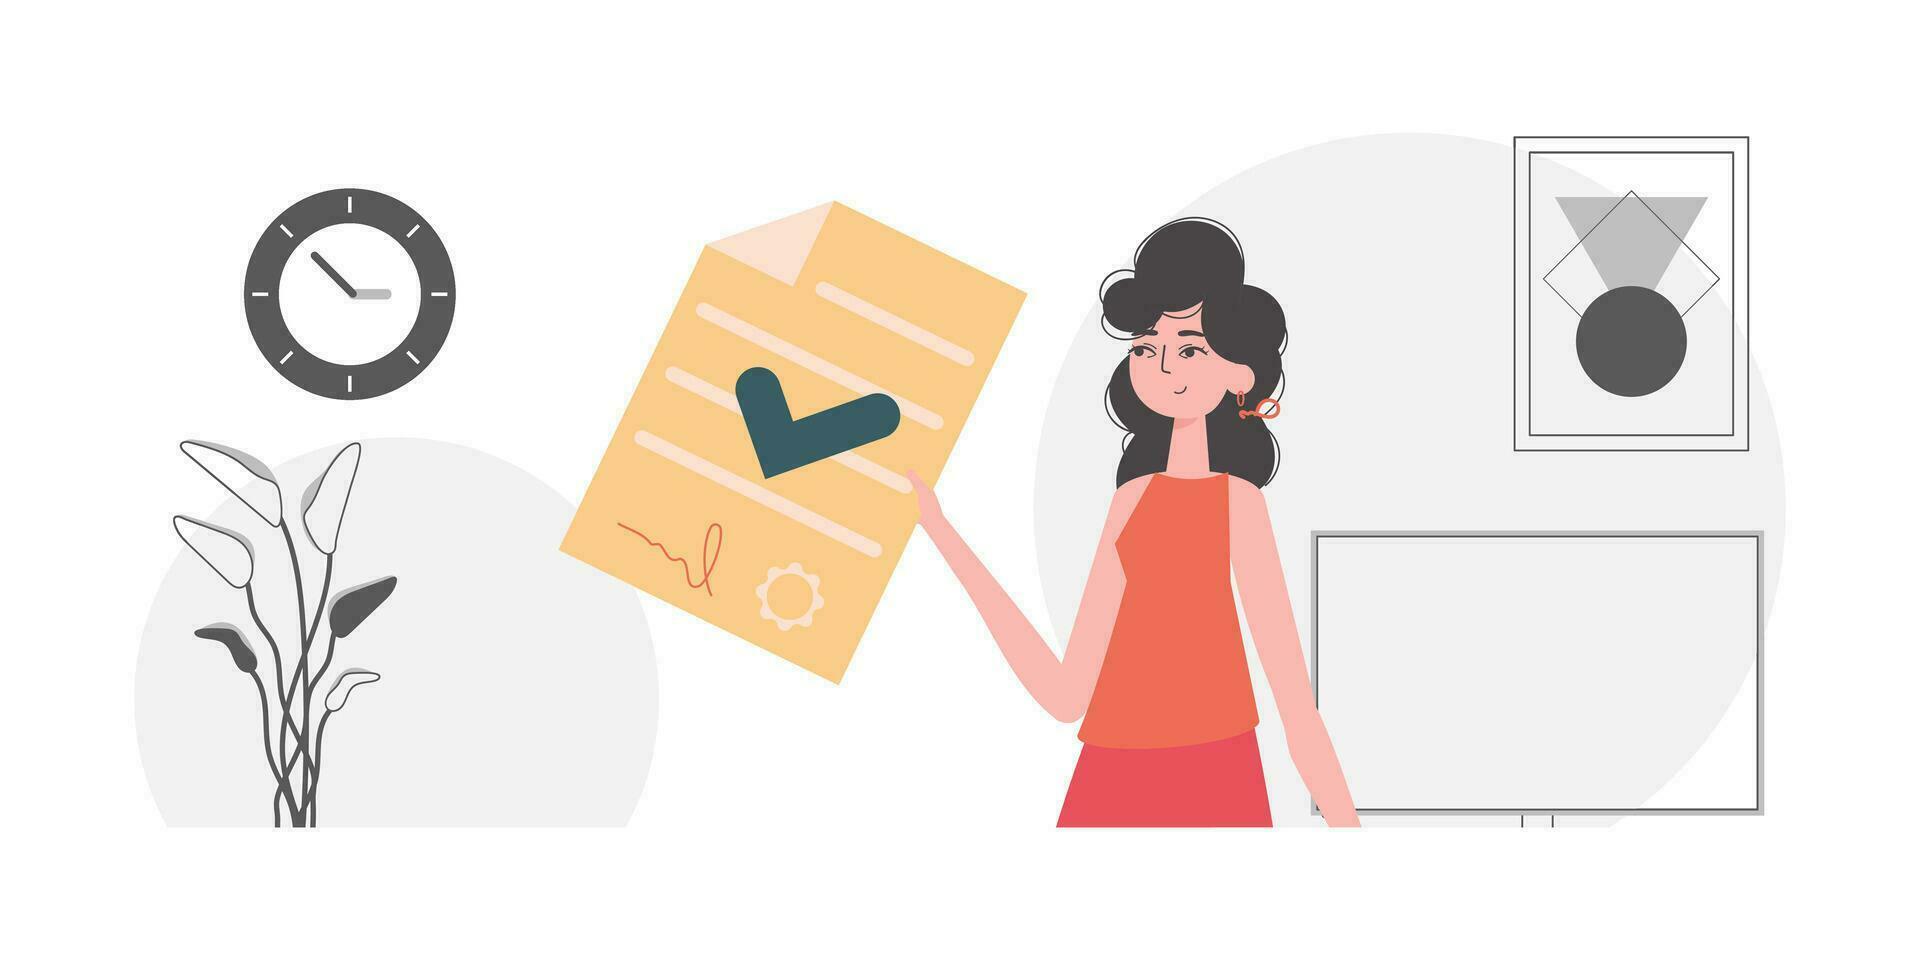 Data protection concept. Smart contract. The girl is holding a contract or a document. vector